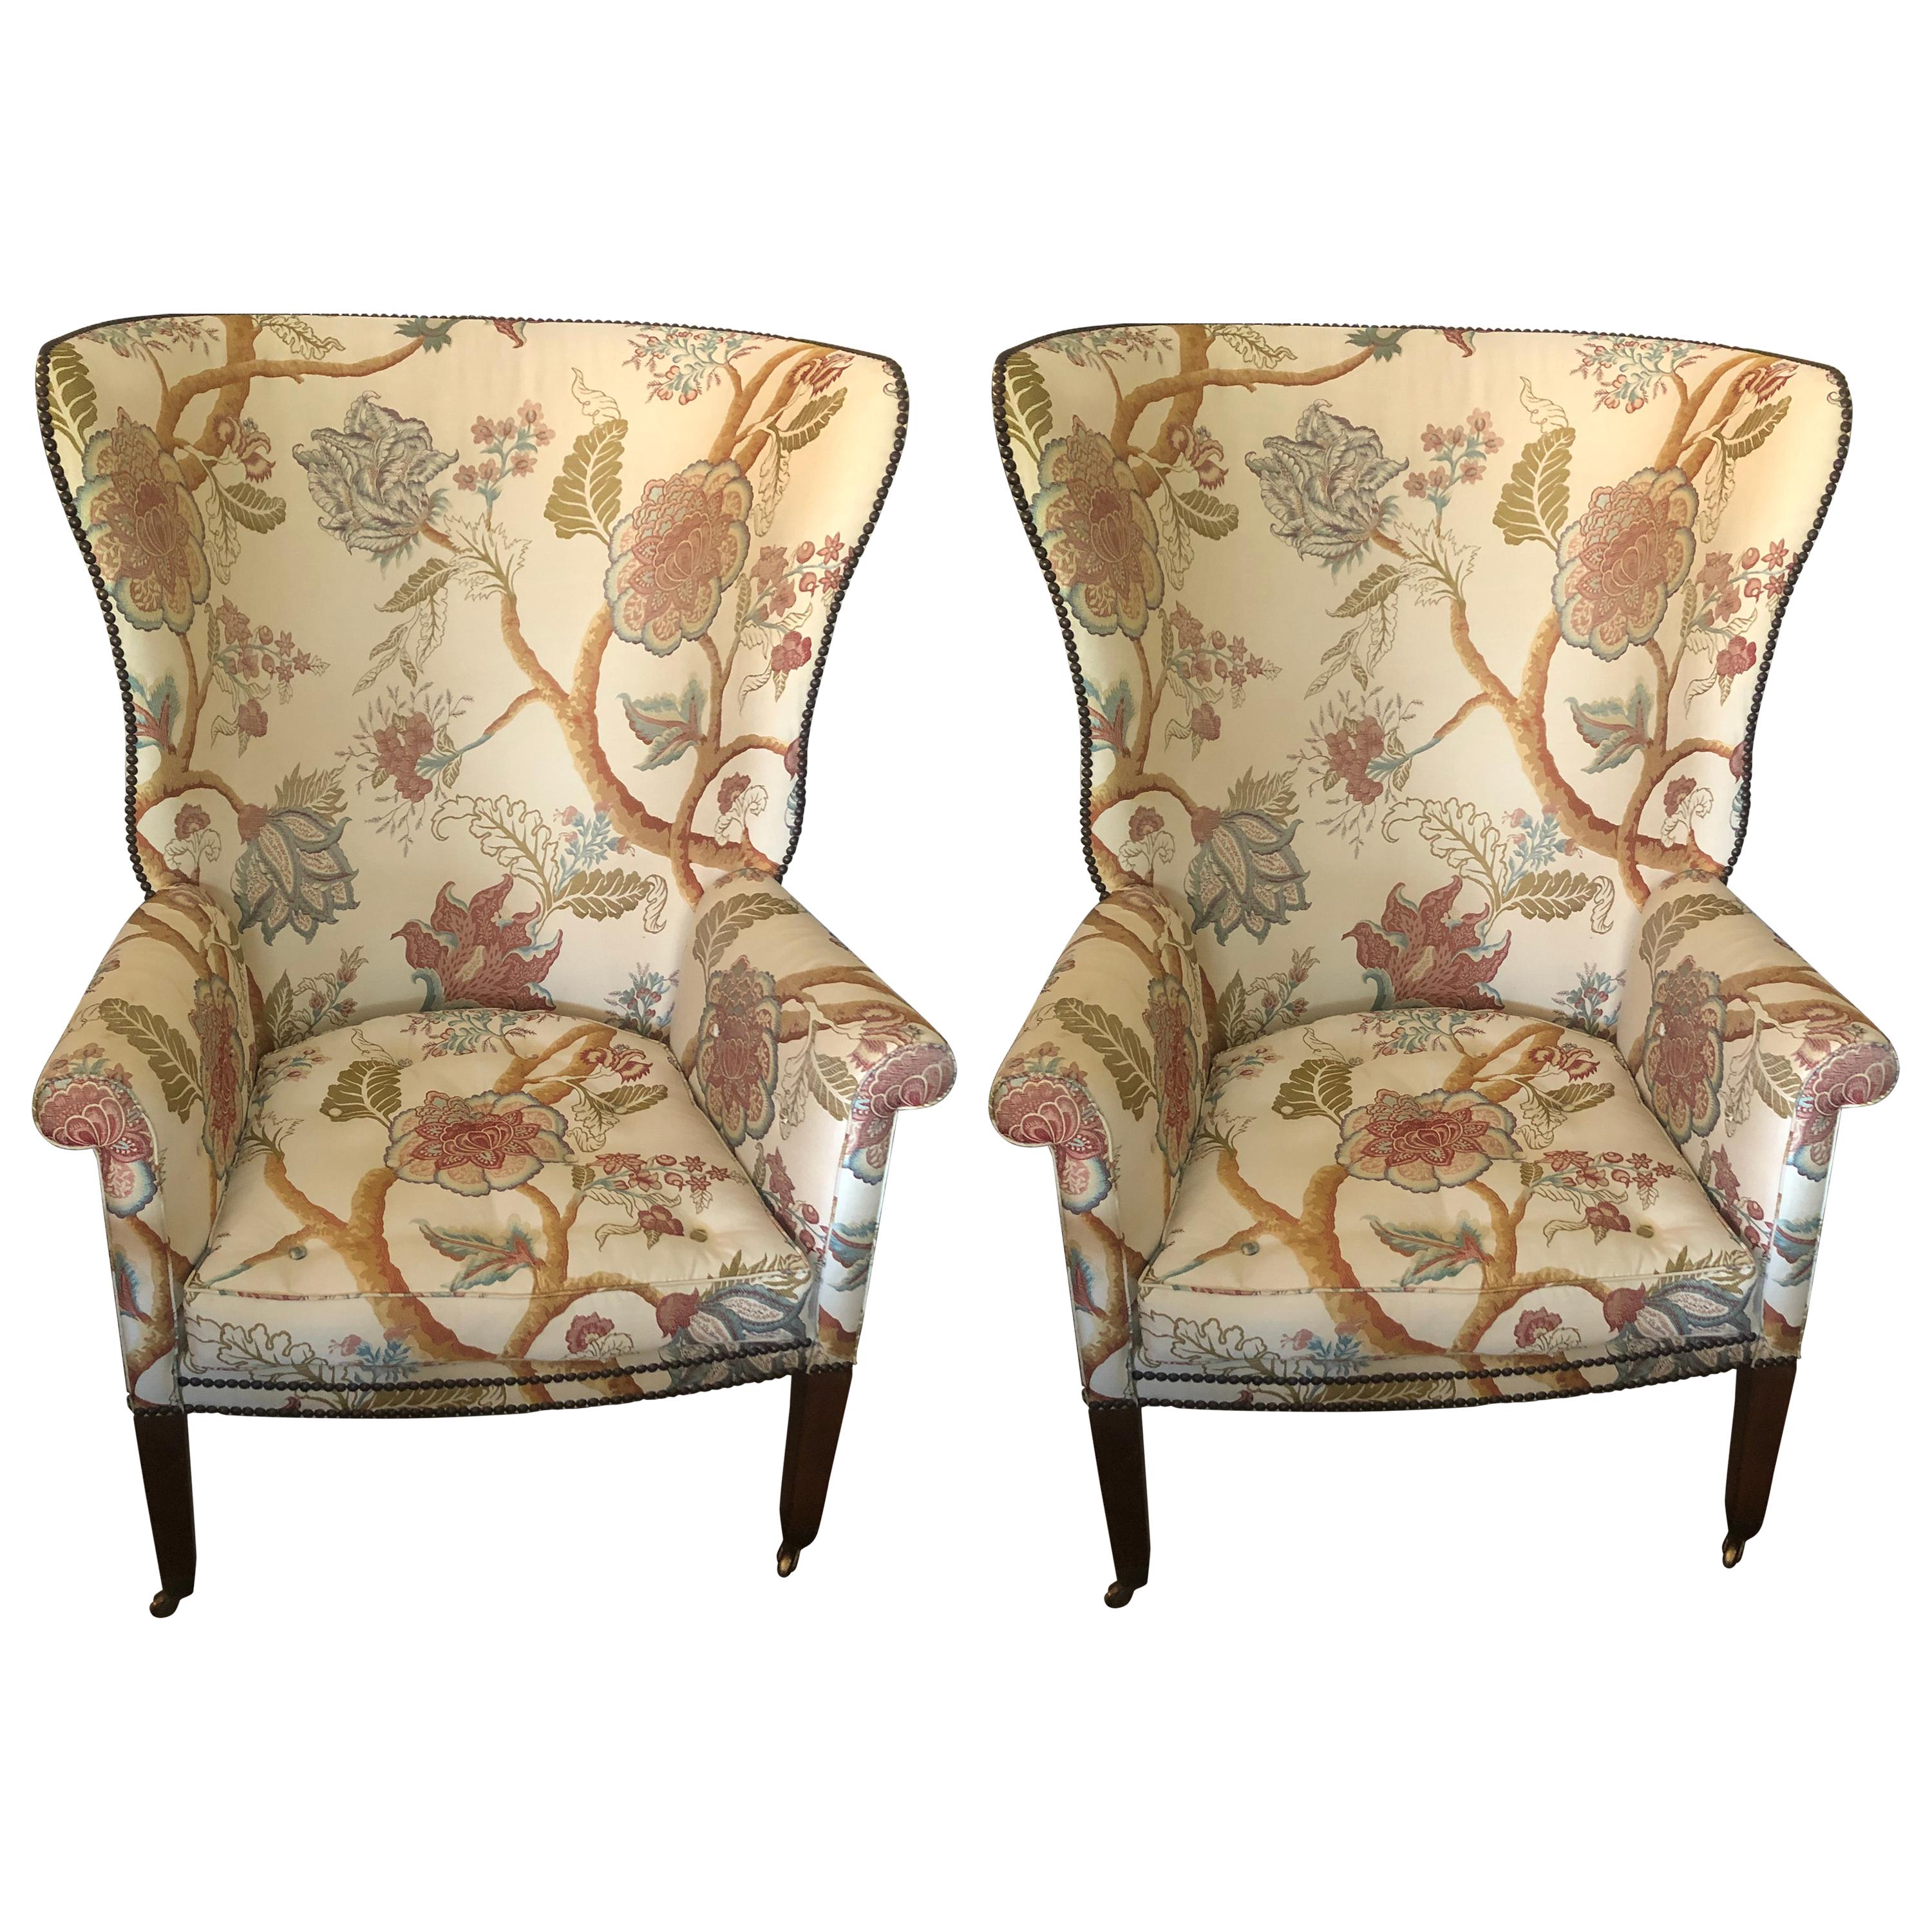 Elegant Pair of Georgian Style Wing Chairs by William Switzer